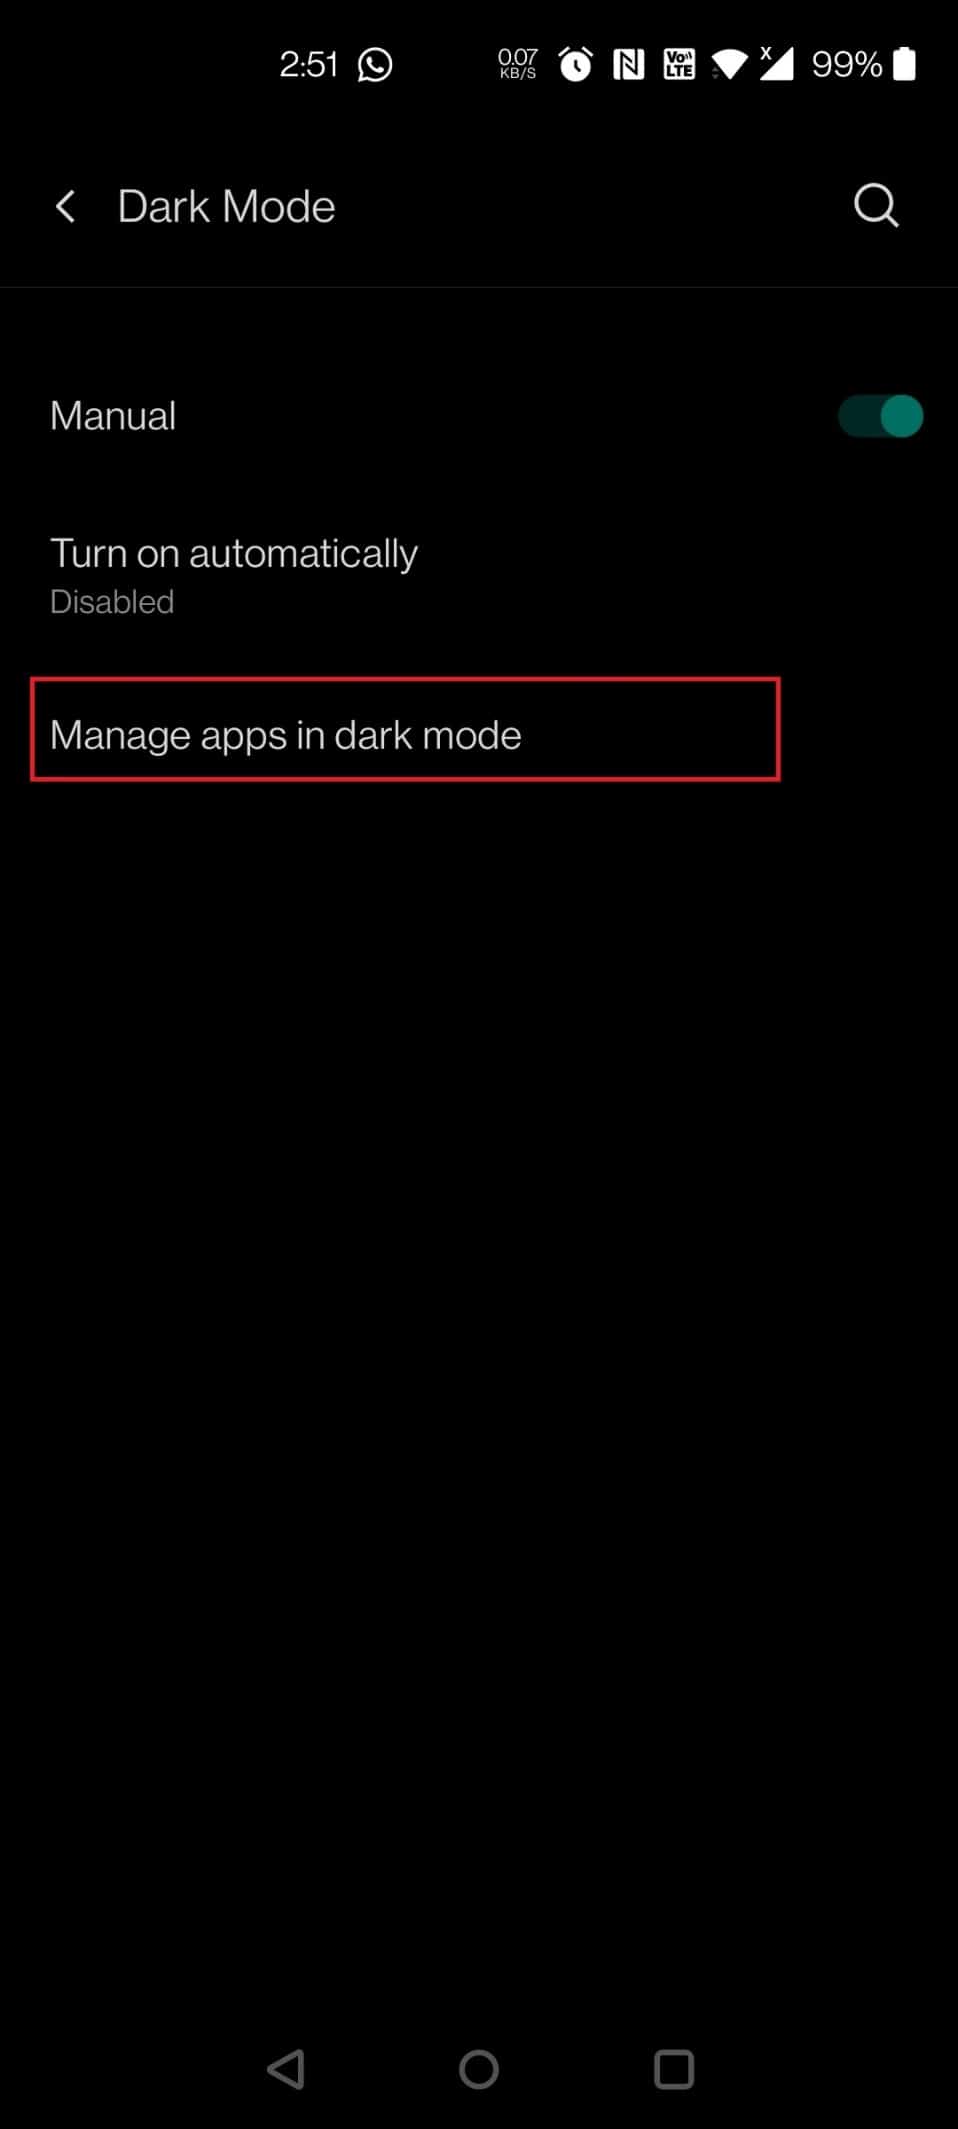 Tap on Manage apps in dark mode